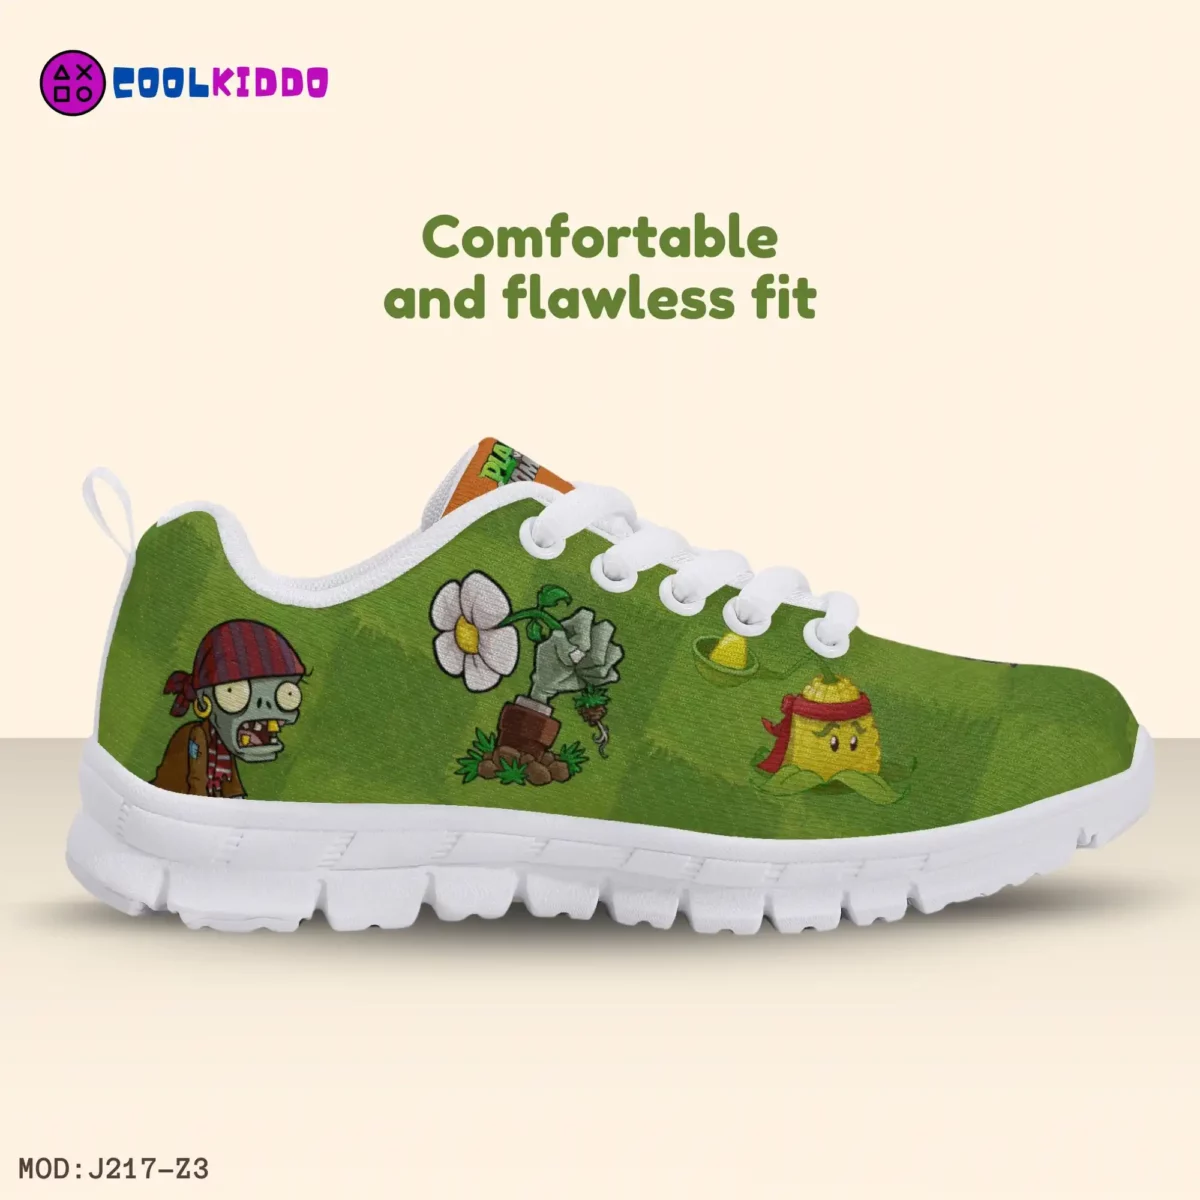 Personalized Plants vs Zombies Video Game Inspired Athletic Shoes for Kids/Youth Lightweight Mesh Sneakers Cool Kiddo 14